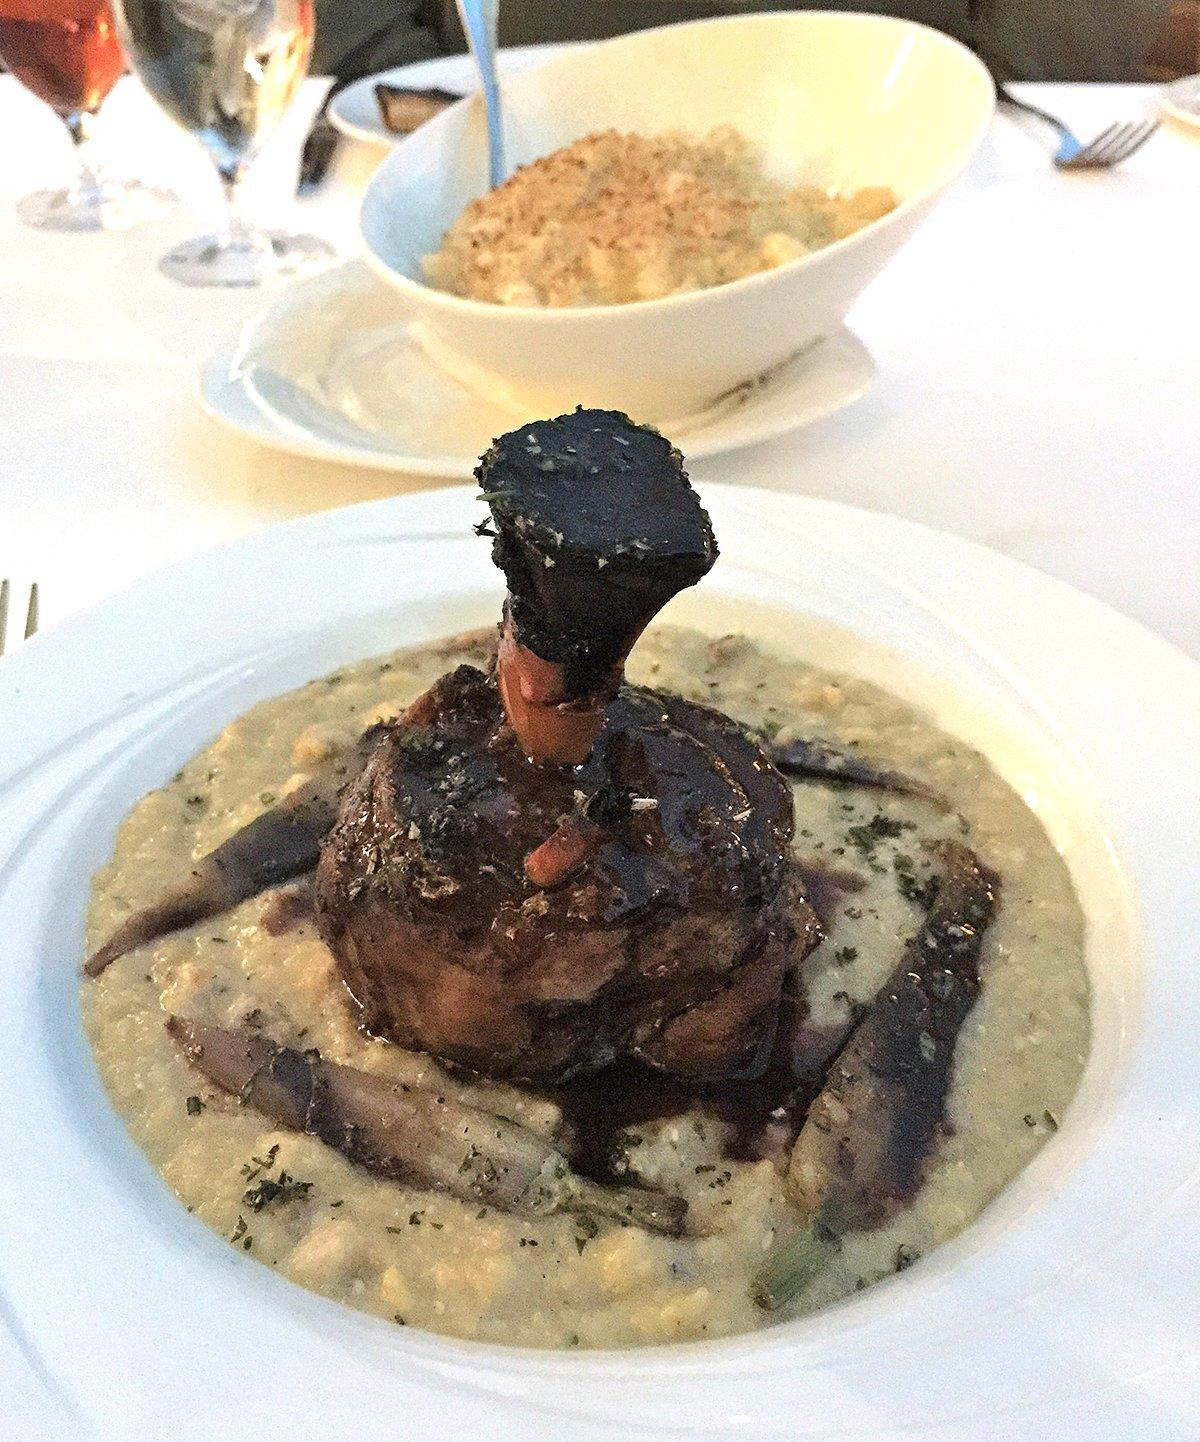 Try the pork shanks braised in duck fat at the Old Hickory Steakhouse at Opryland Hotel.